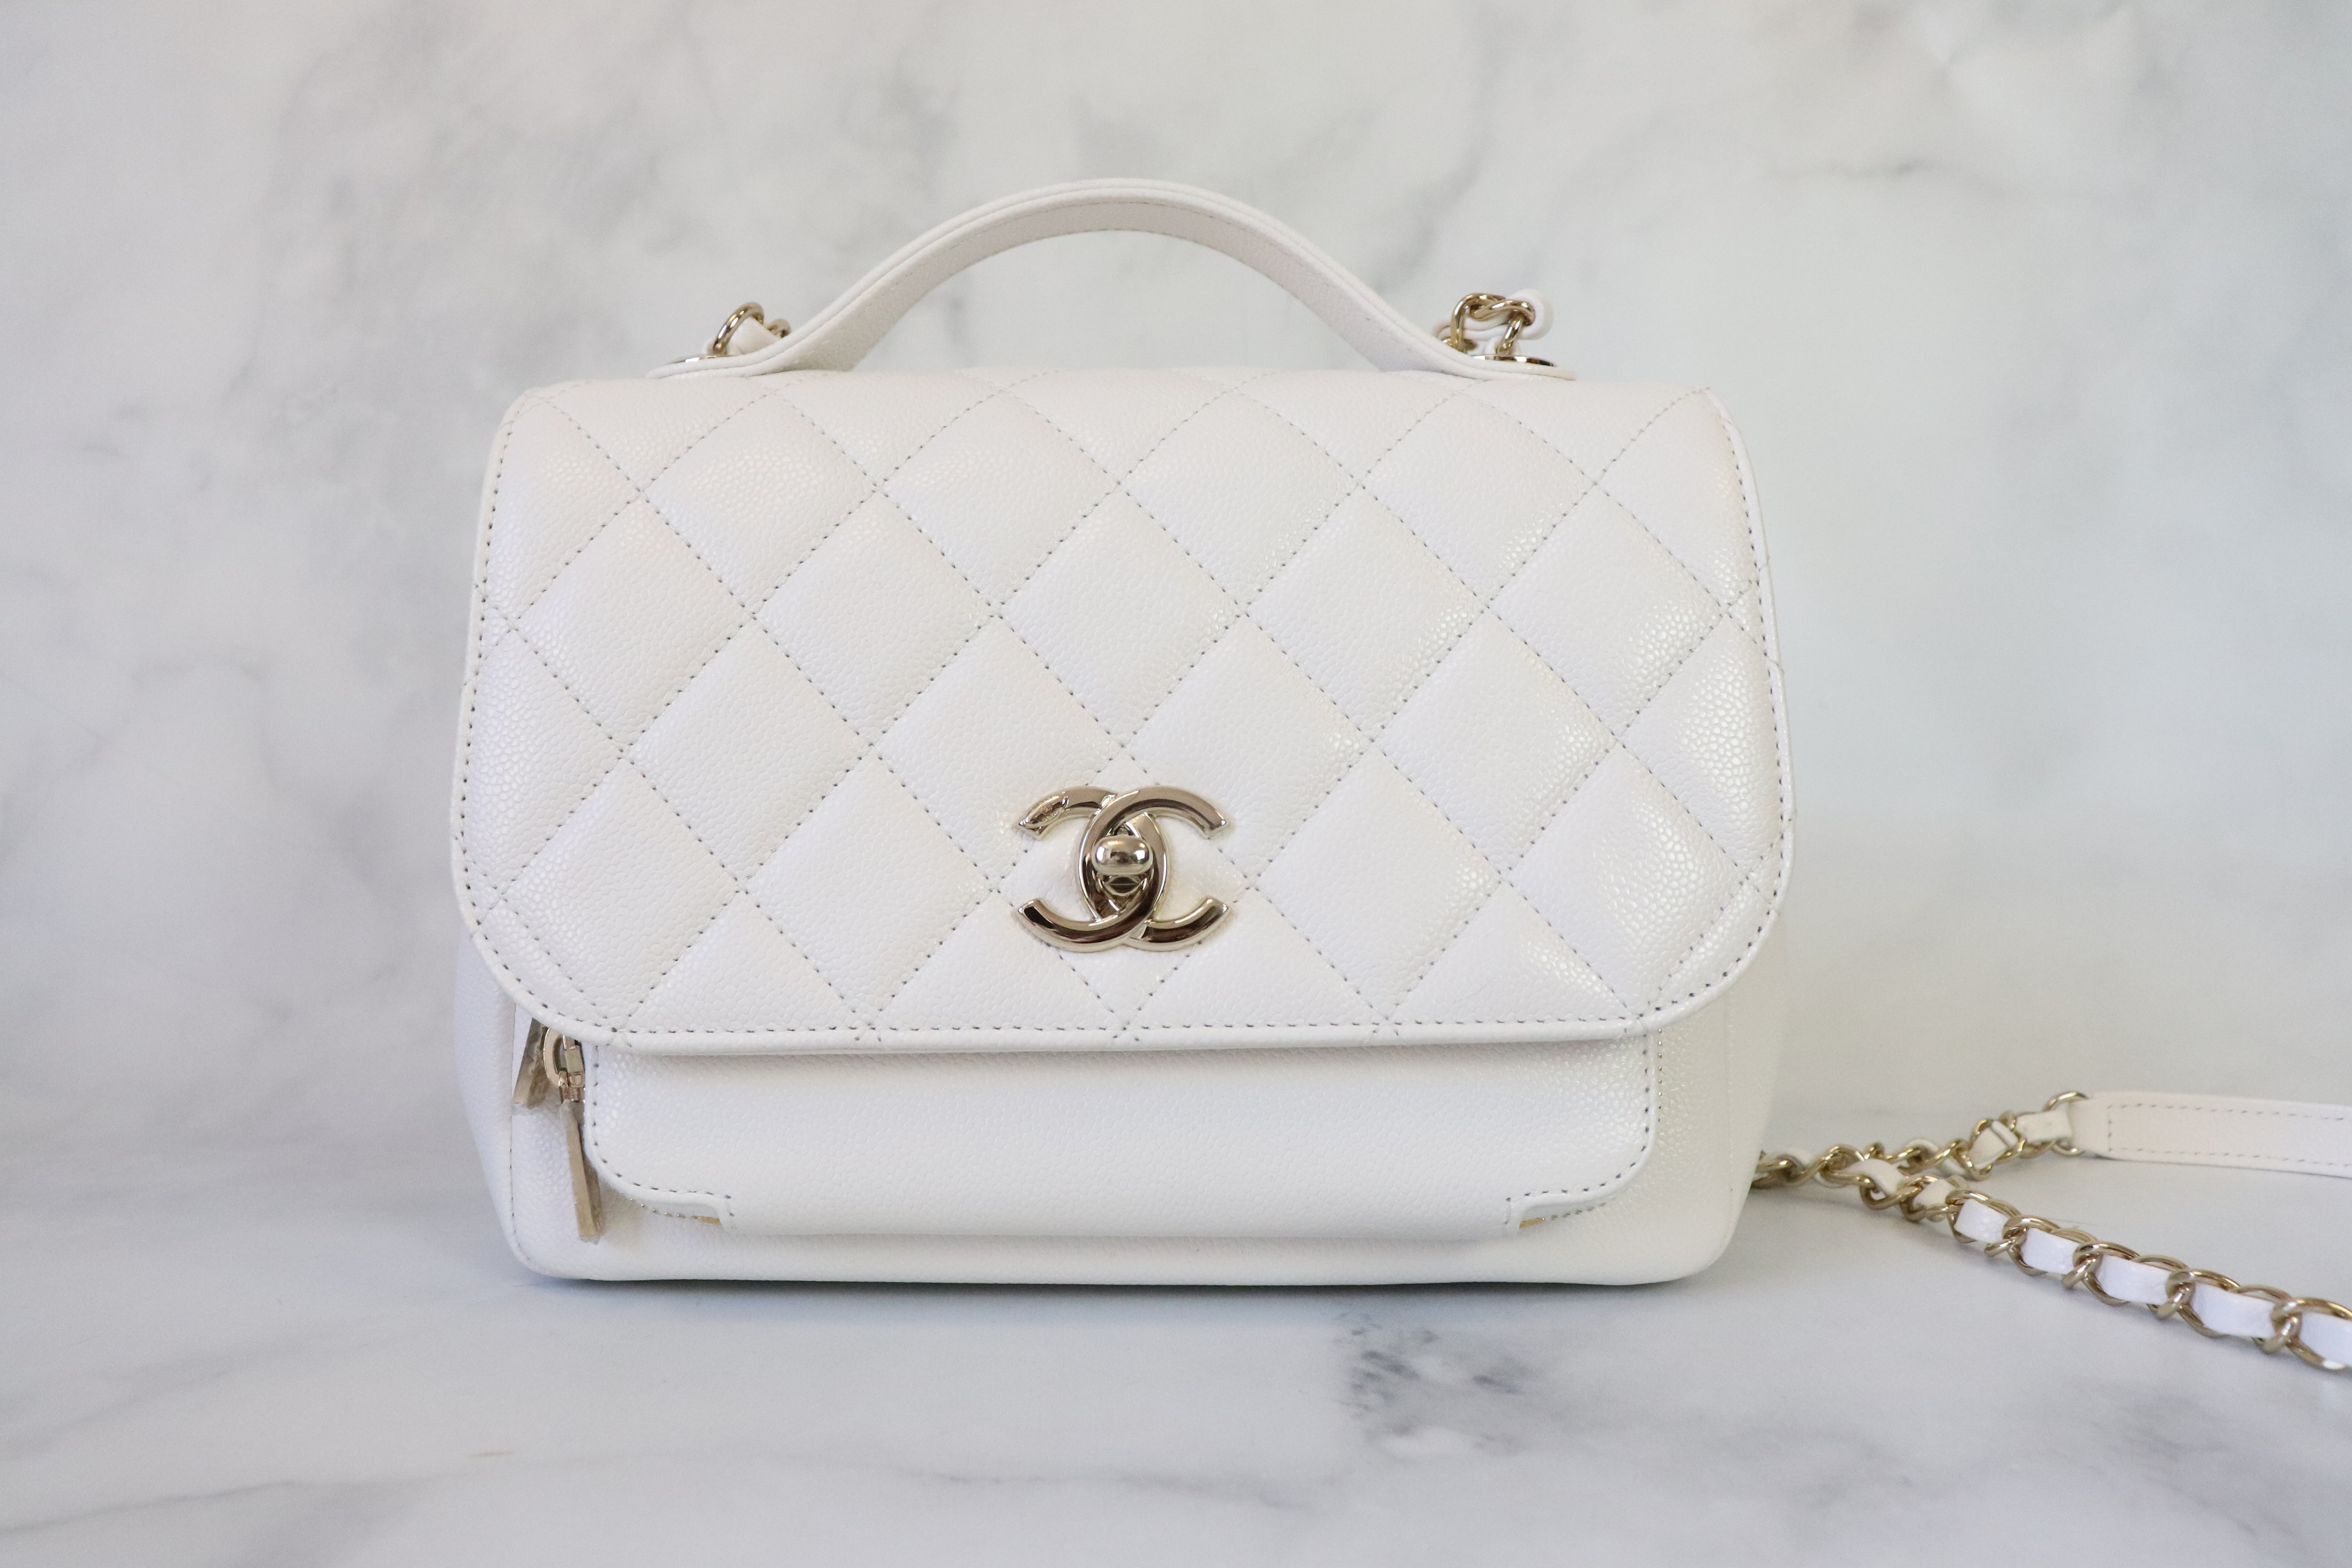 Chanel Business Affinity Small, White Caviar with Gold Hardware, Preowned  no Dustbag WA001